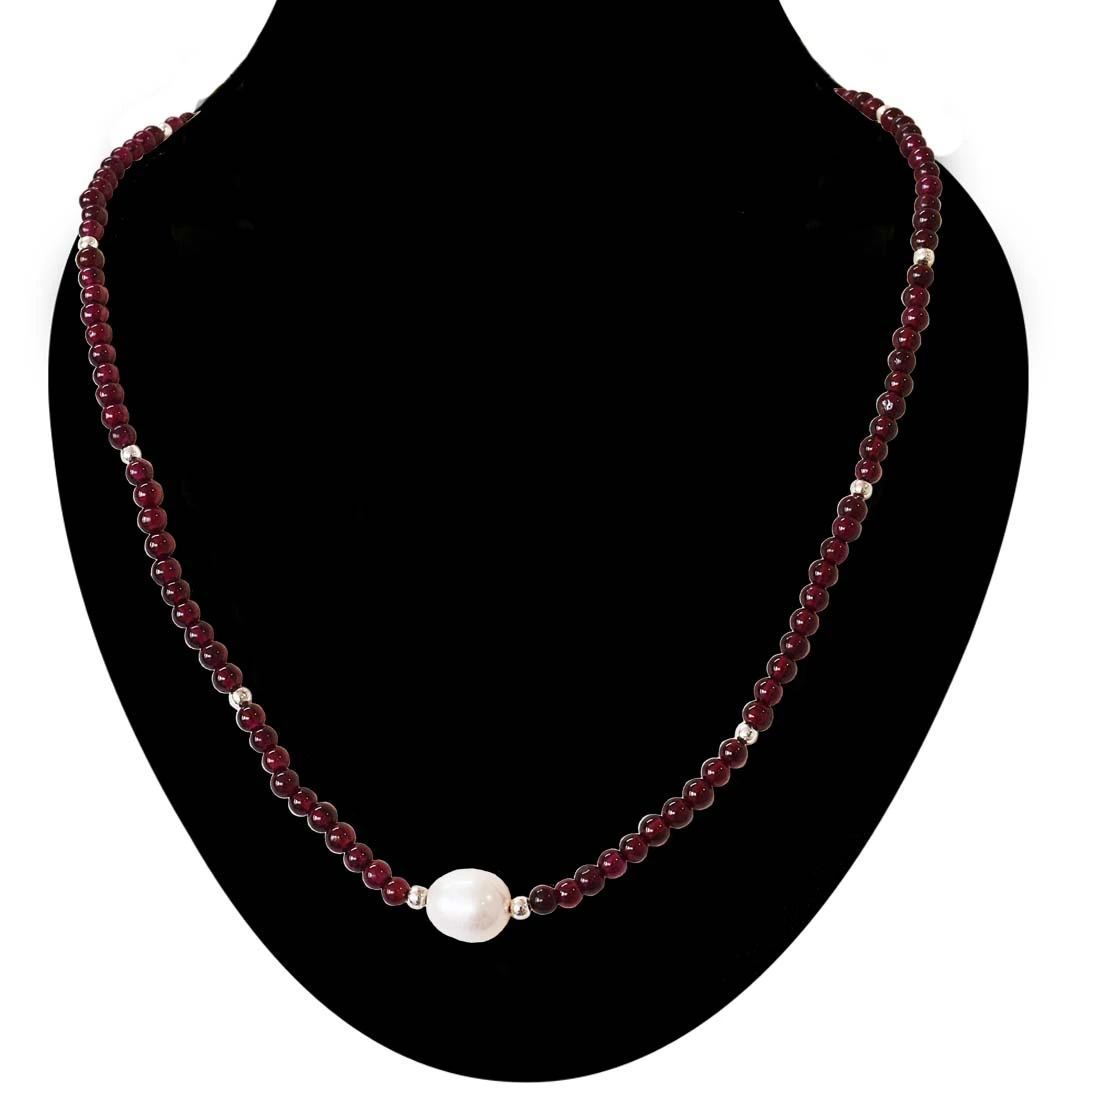 Single Line Garnet Necklace with Pearl Centre and Silver Beads (SN1001)